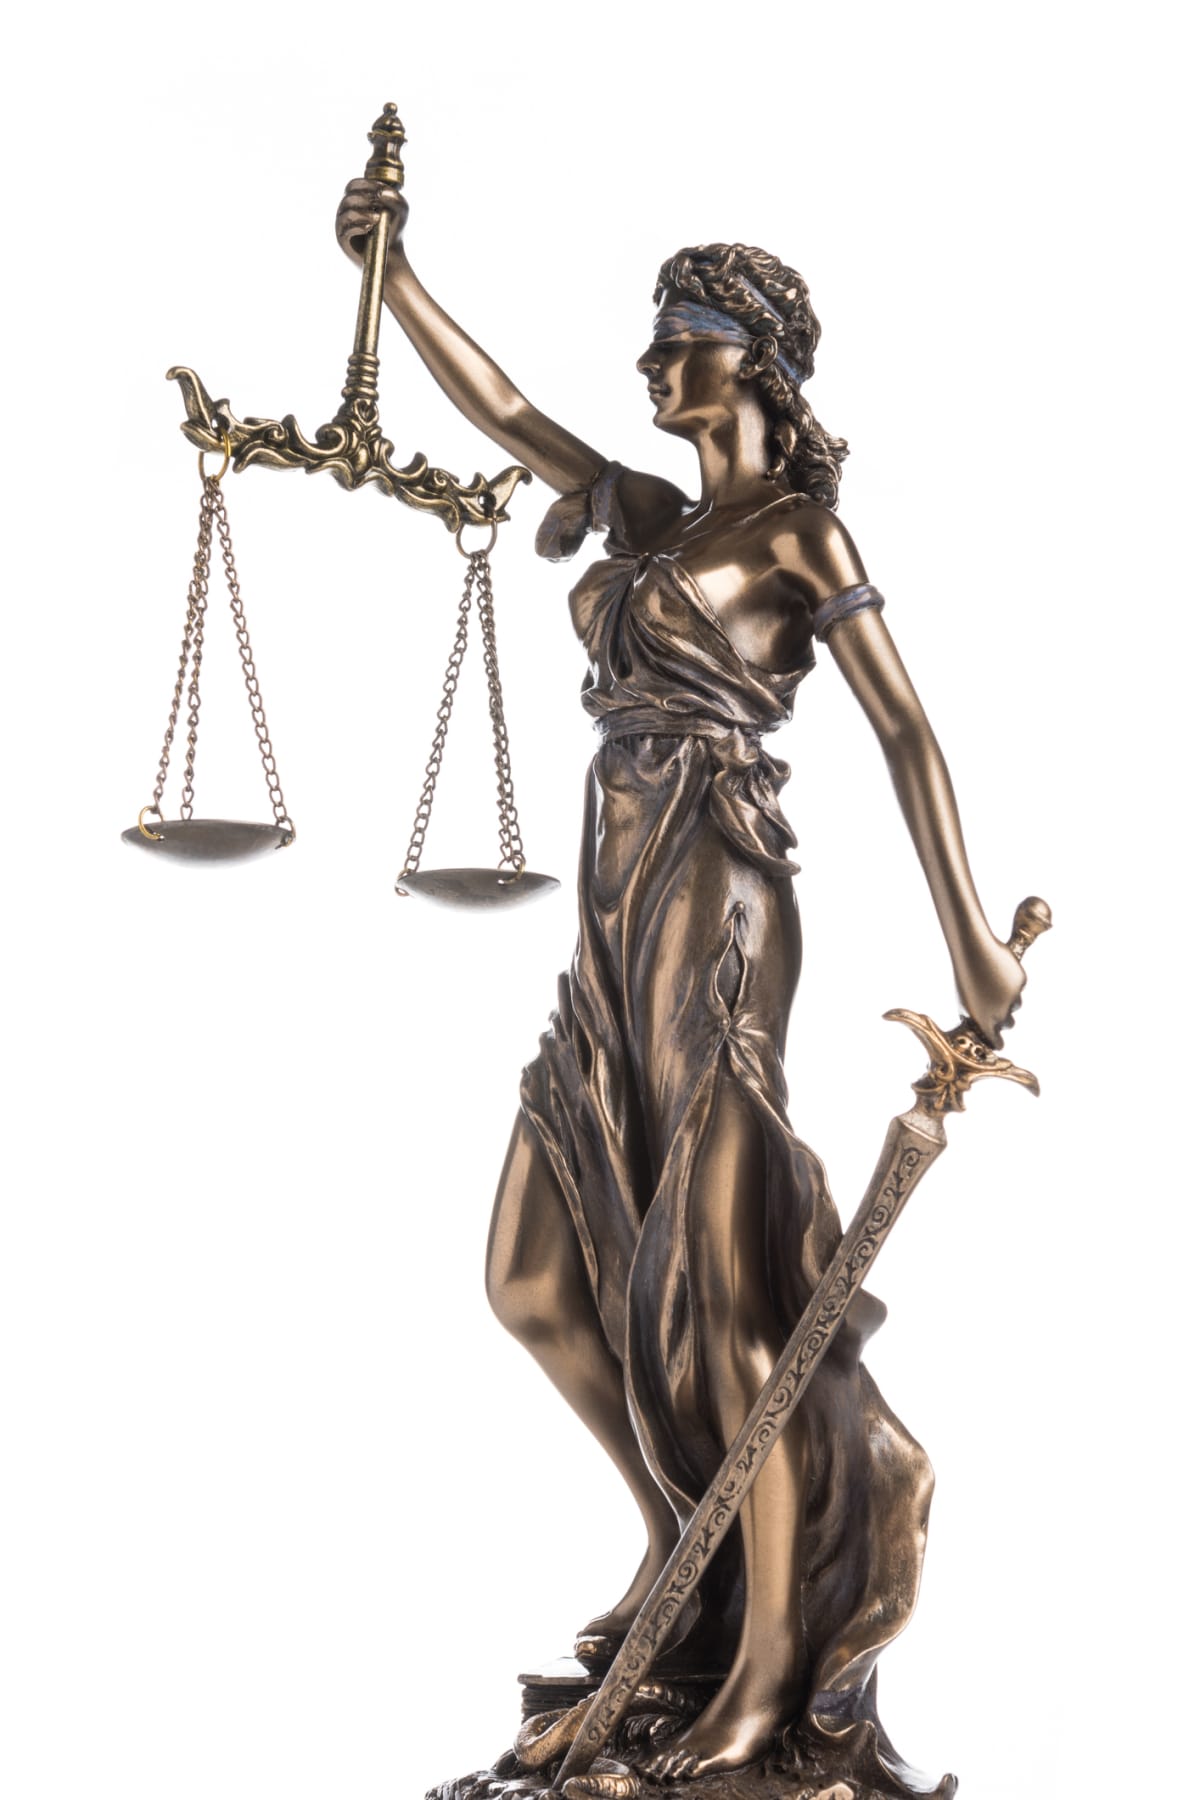 Statue of Themis holding the scales of justice